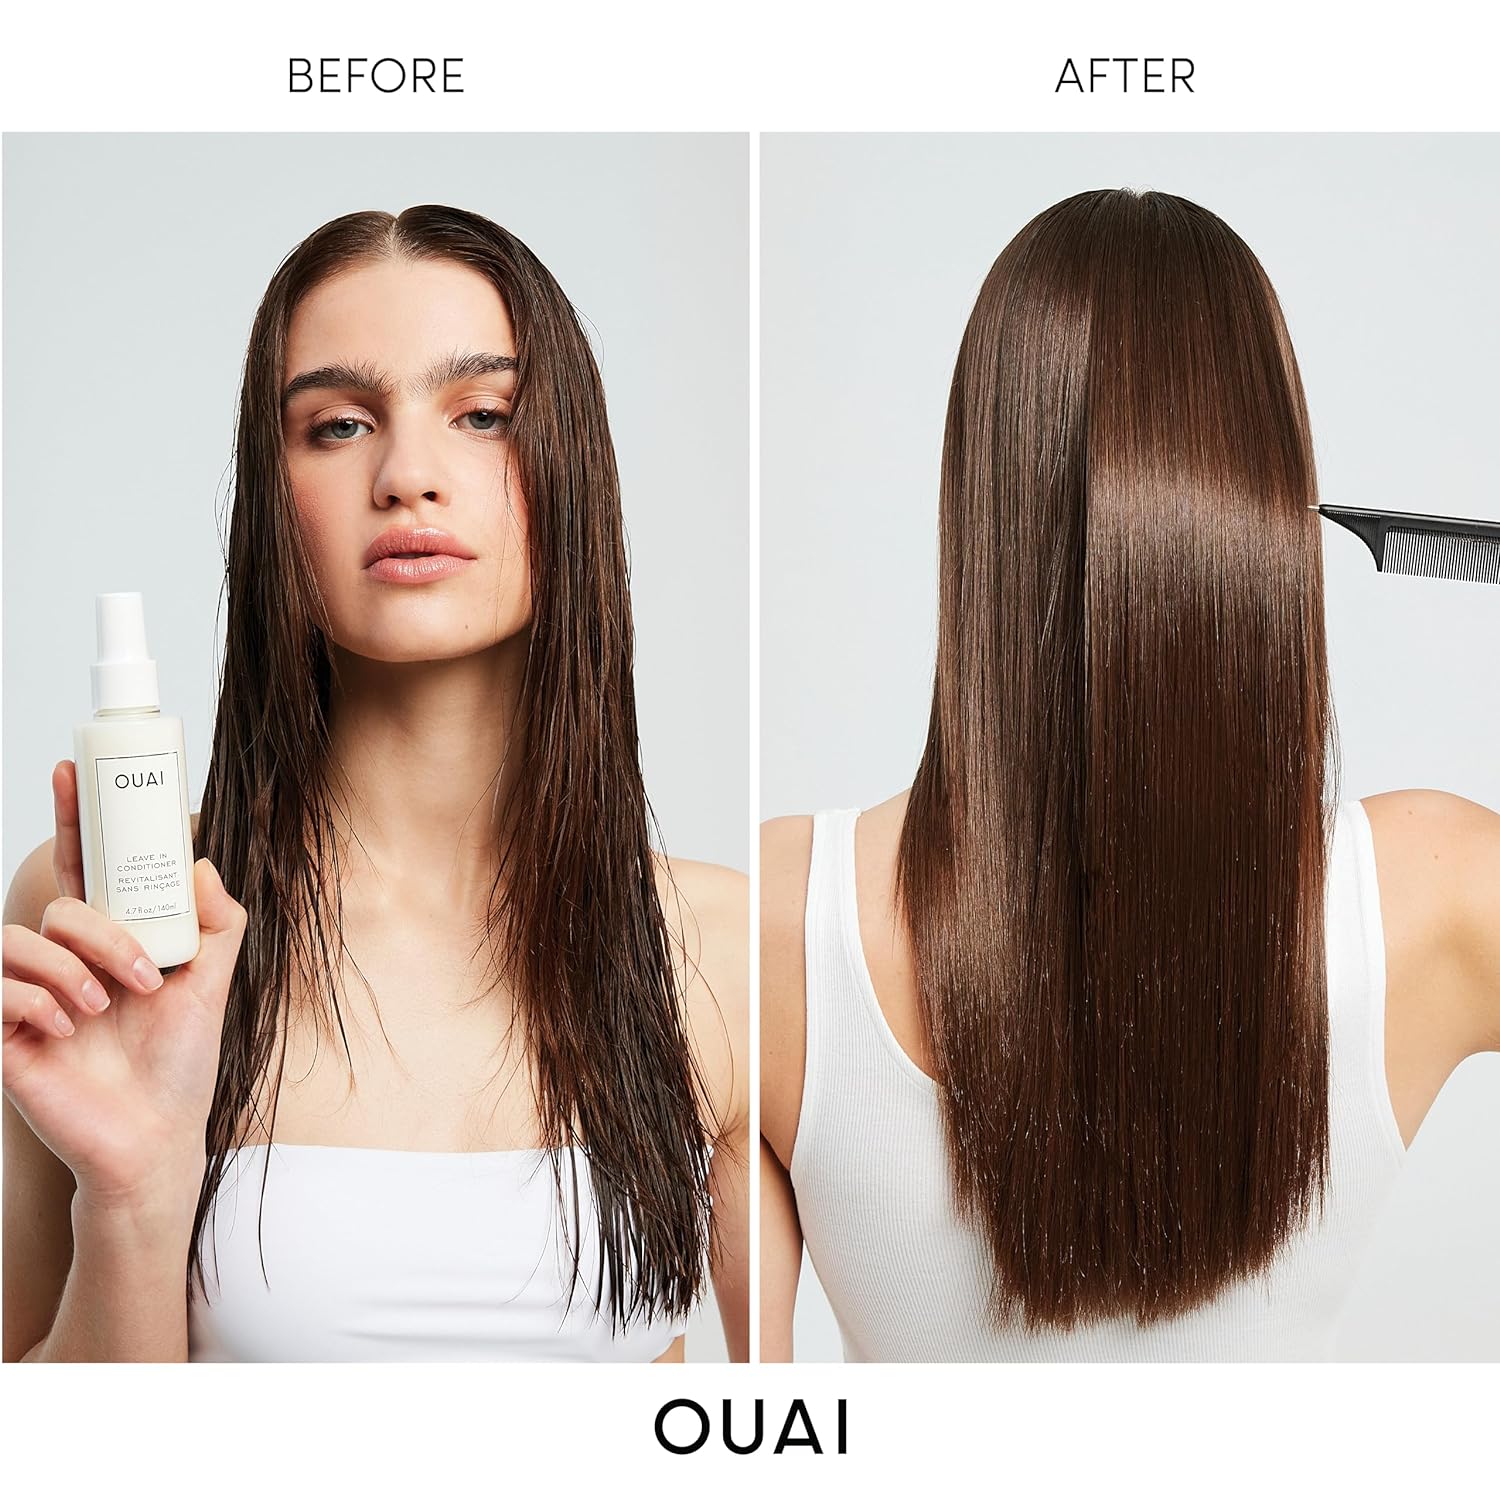 OUAI Leave In Conditioner Bundle - Multitasking Heat Protectant Spray for Hair - Prime Hair for Style, Smooth Flyaways, Add Shine & Use as Detangling Spray (2 Count, 1.5 Oz/4.7 Oz) : Beauty & Personal Care